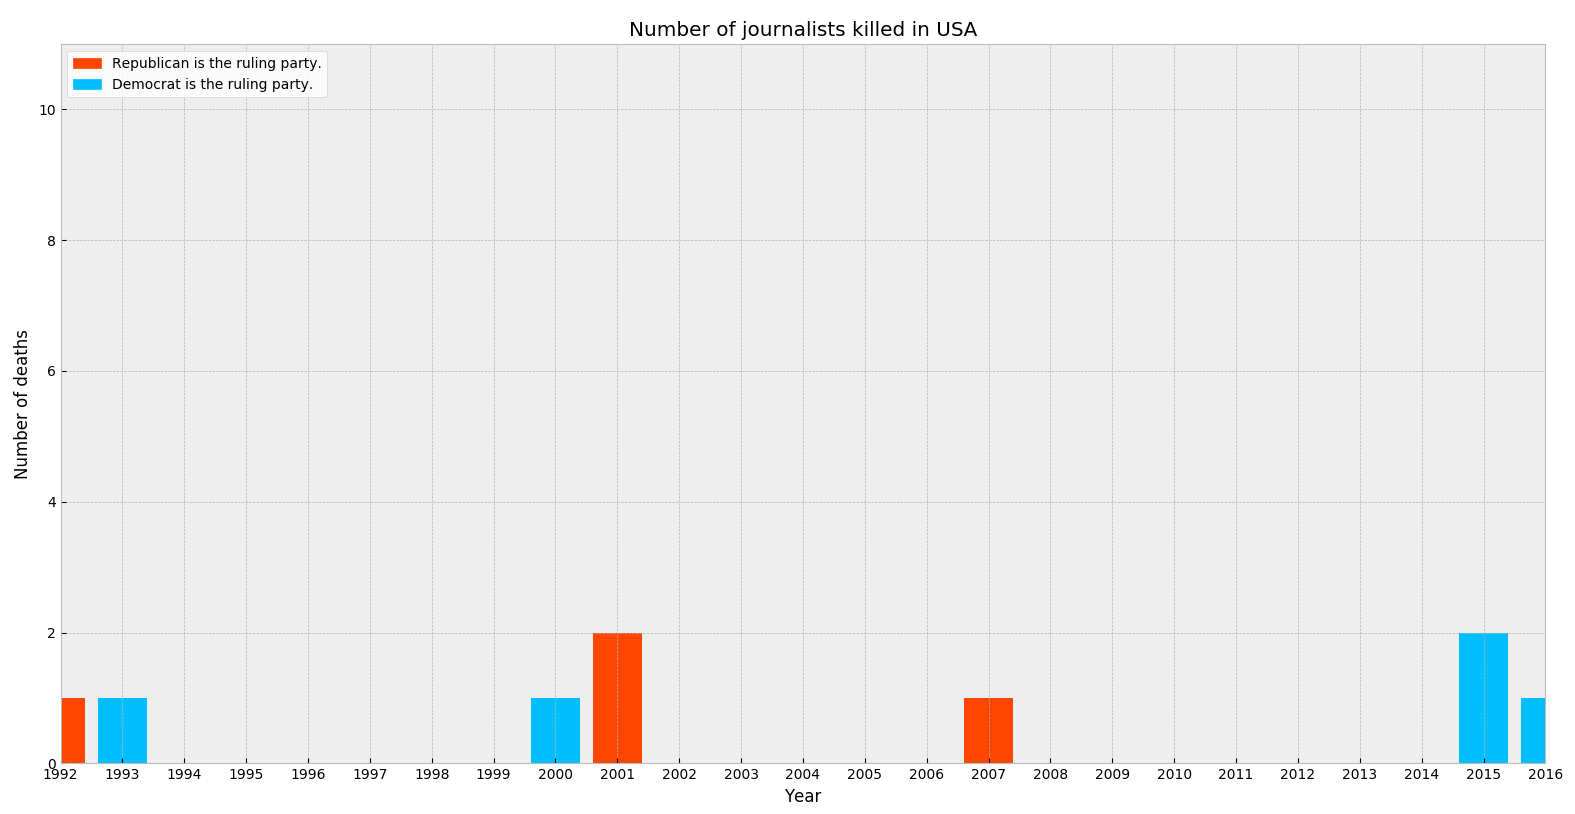 Figure 2: Number of journalists killed in USA.